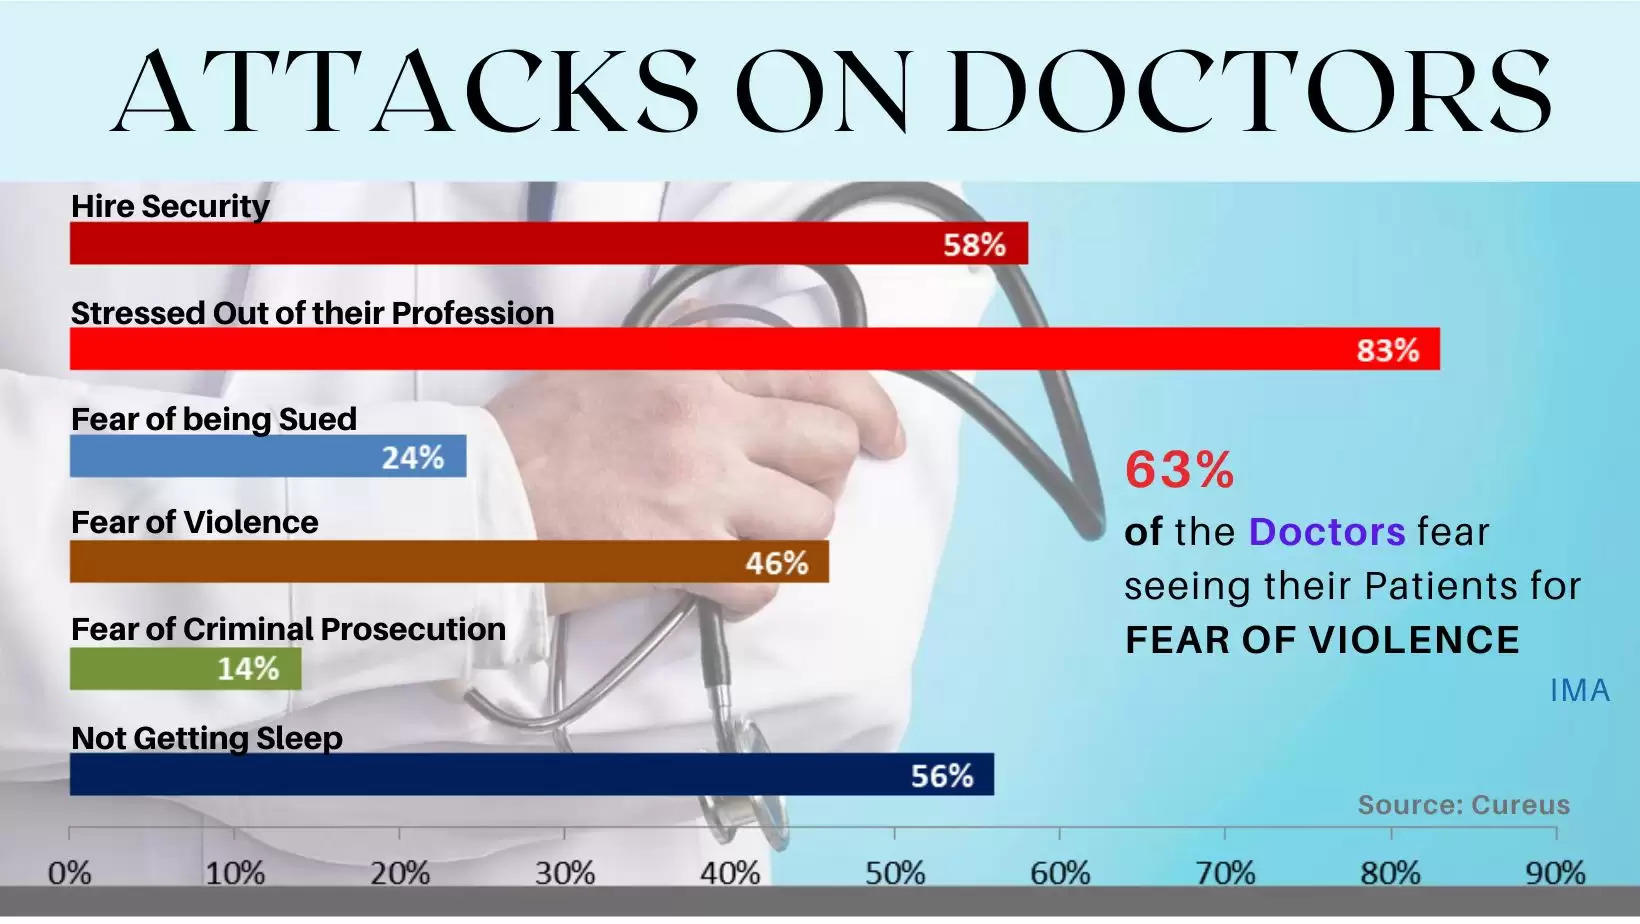 Attacks on Doctors in Udaipur